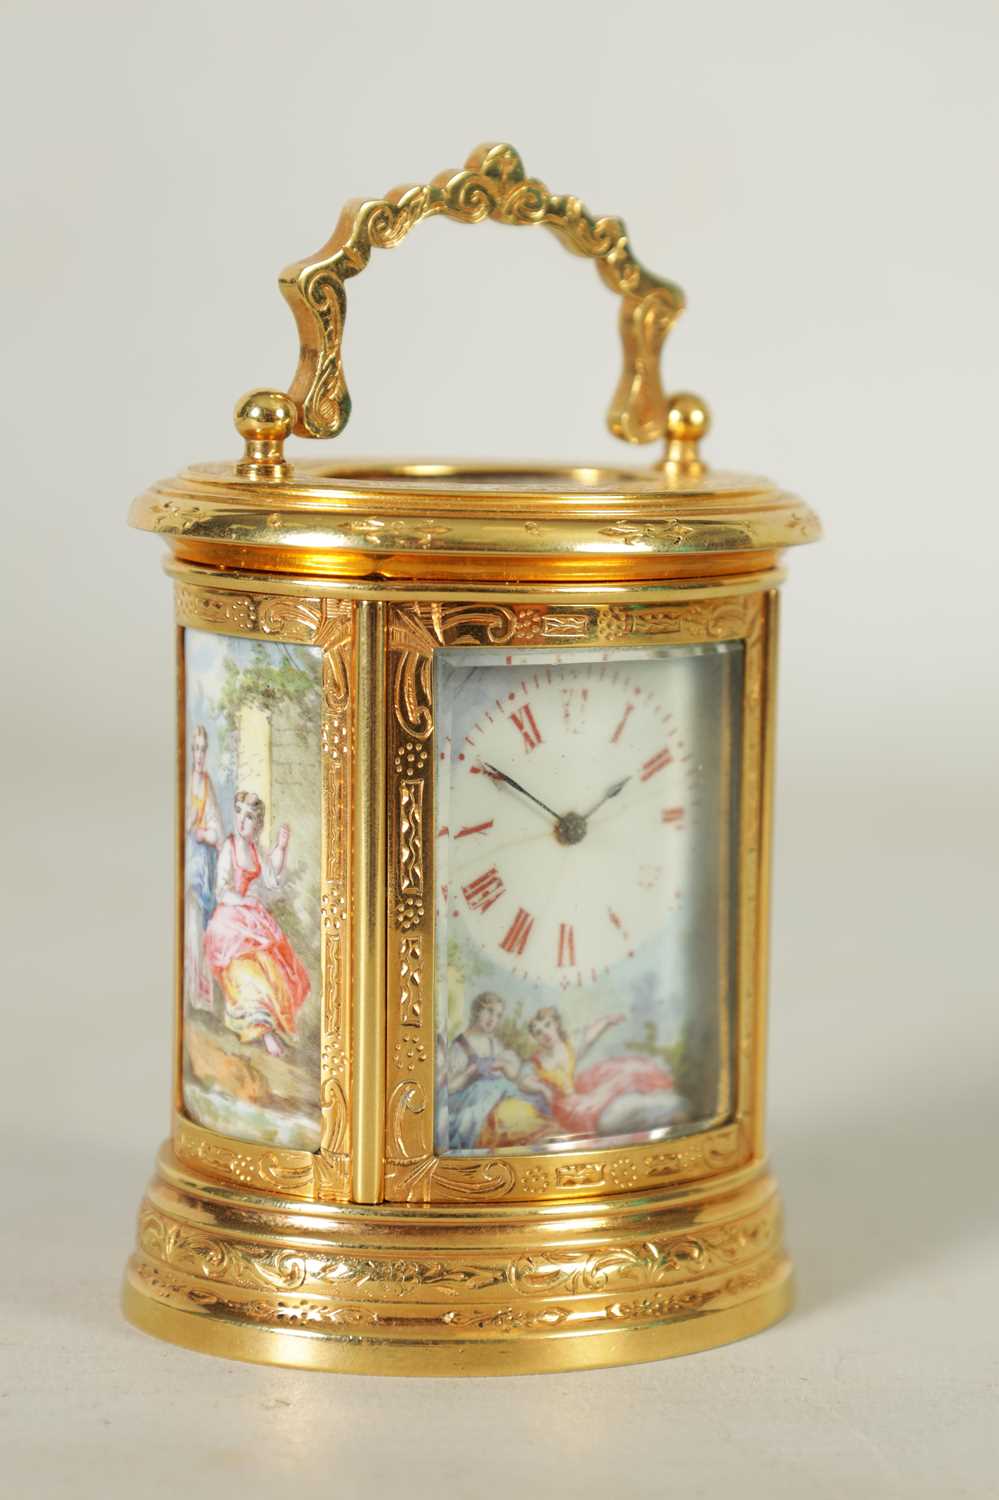 A LATE 19TH CENTURY MINIATURE PORCELAIN PANELLED ENGRAVED OVAL CARRIAGE CLOCK - Image 2 of 8